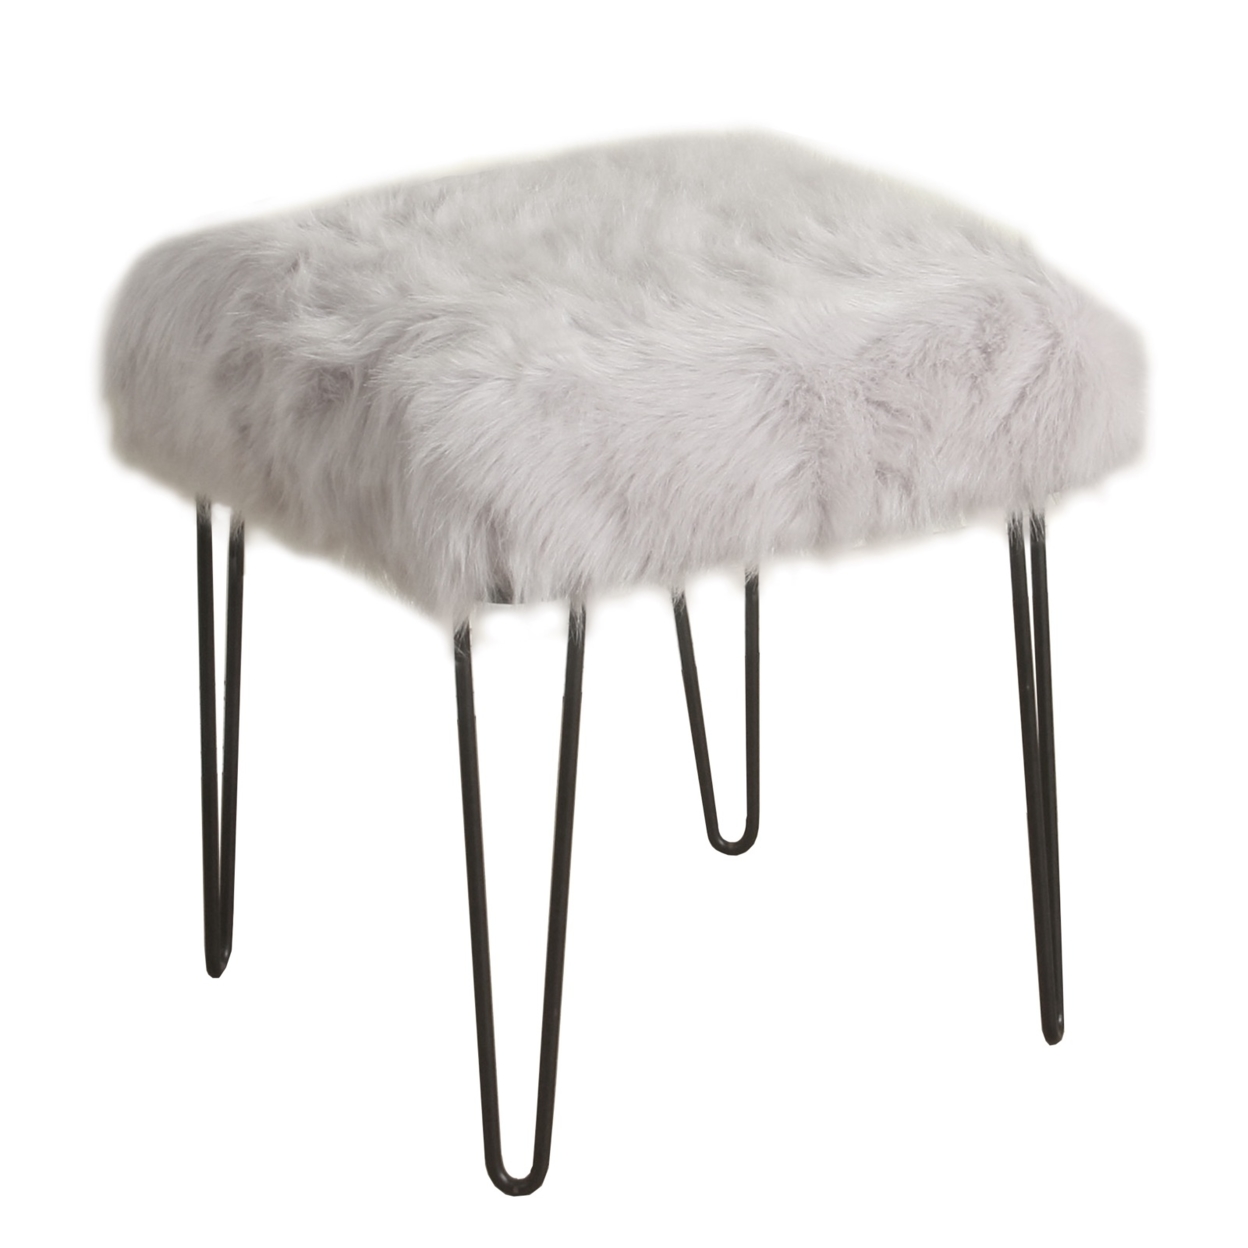 Metal Framed Stool With Faux Fur Upholstered Seat And Hairpin Legs, Gray And Black- Saltoro Sherpi